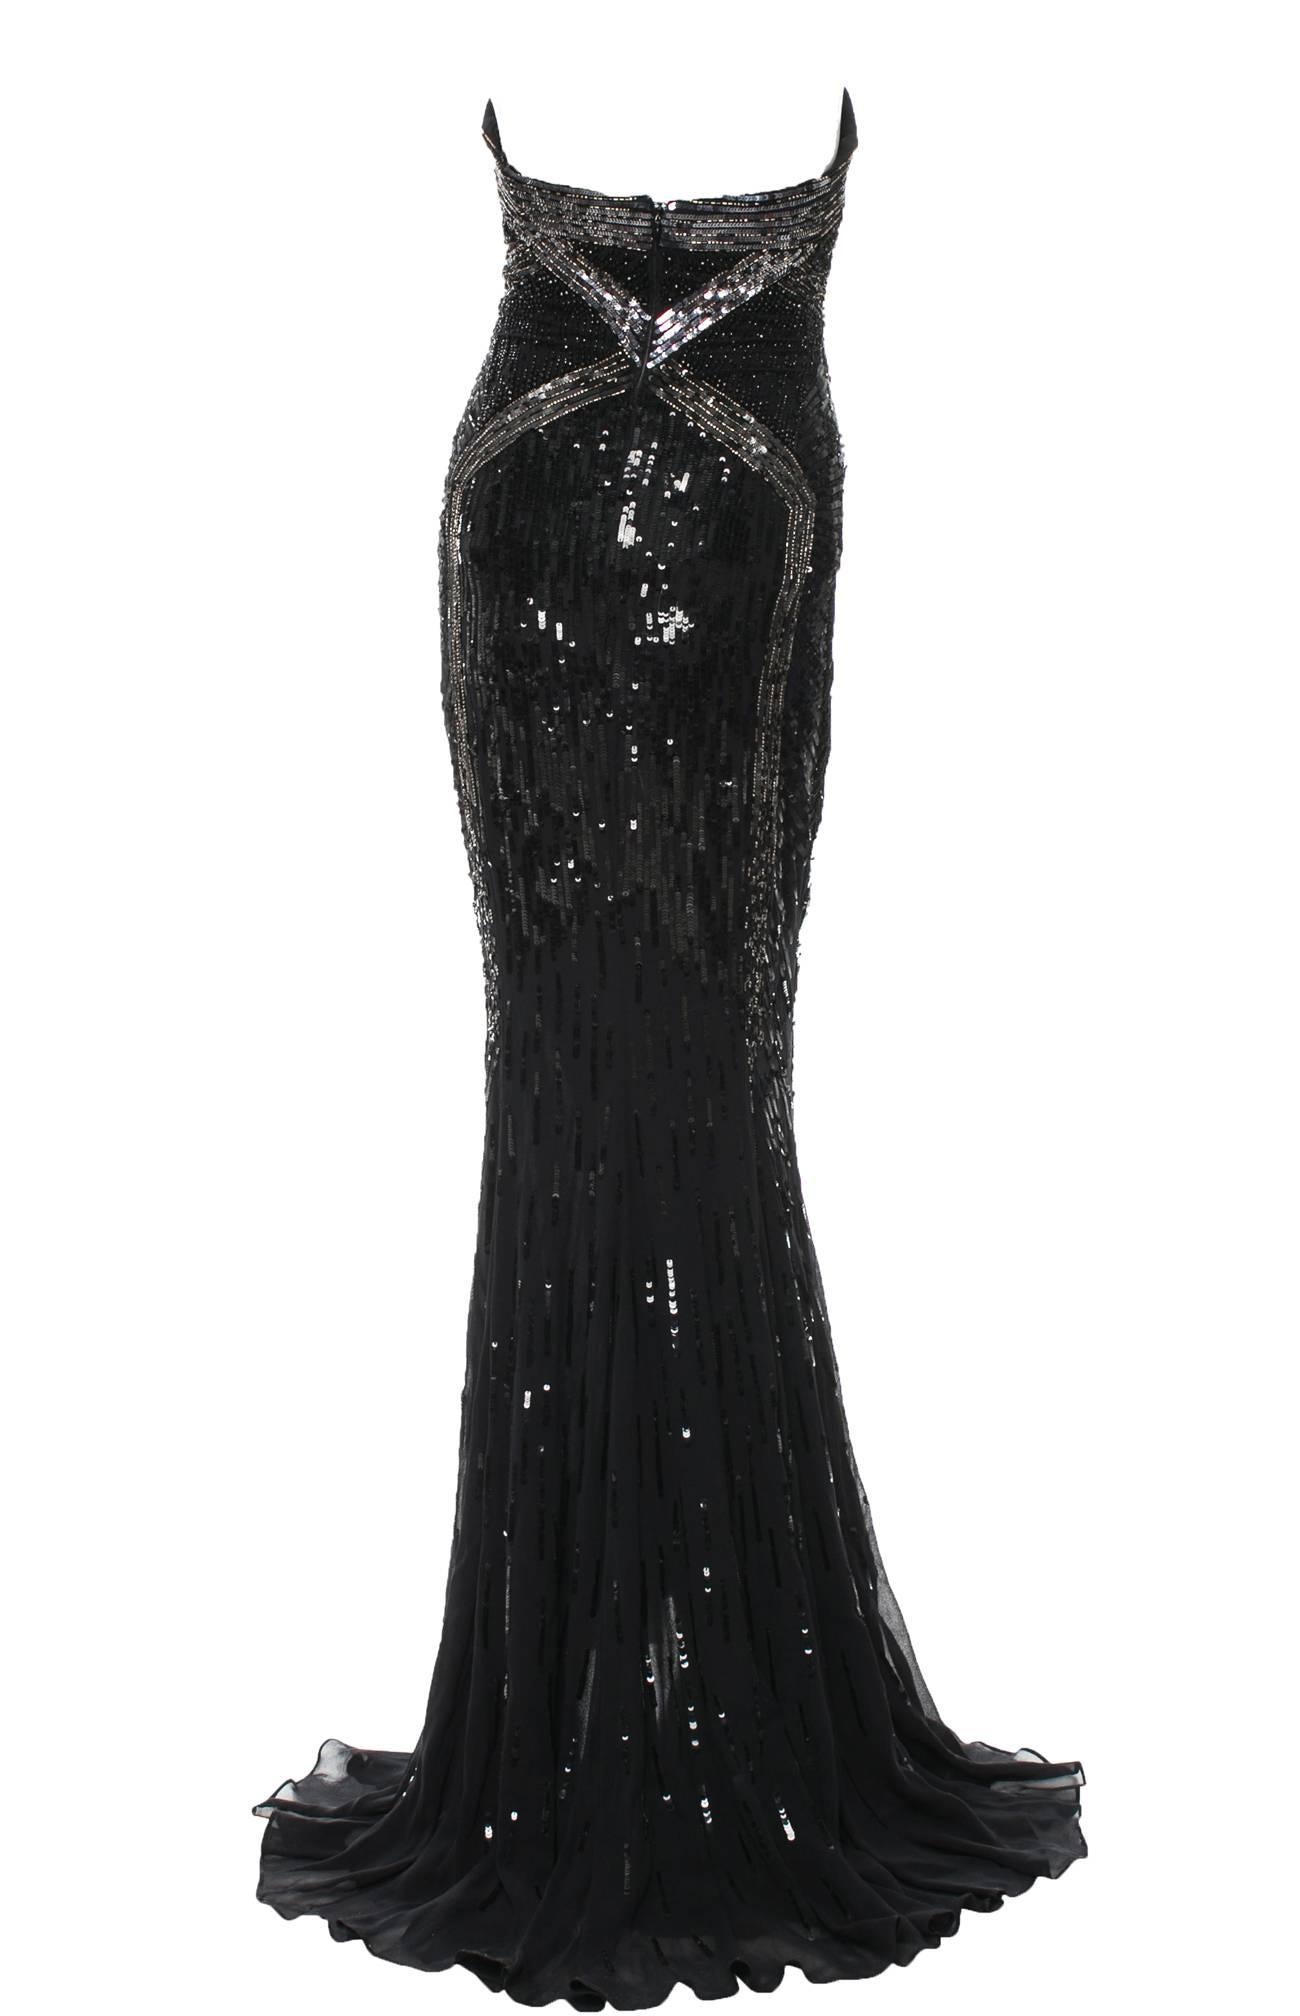 ROBERTO CAVALLI Embellished Black Dress Gown
Italian Size 40 - US 4
100% Silk, Beads & Sequins Embellished,  Corset  Insert, Fully Lined.
Made in Italy
New without Tag.